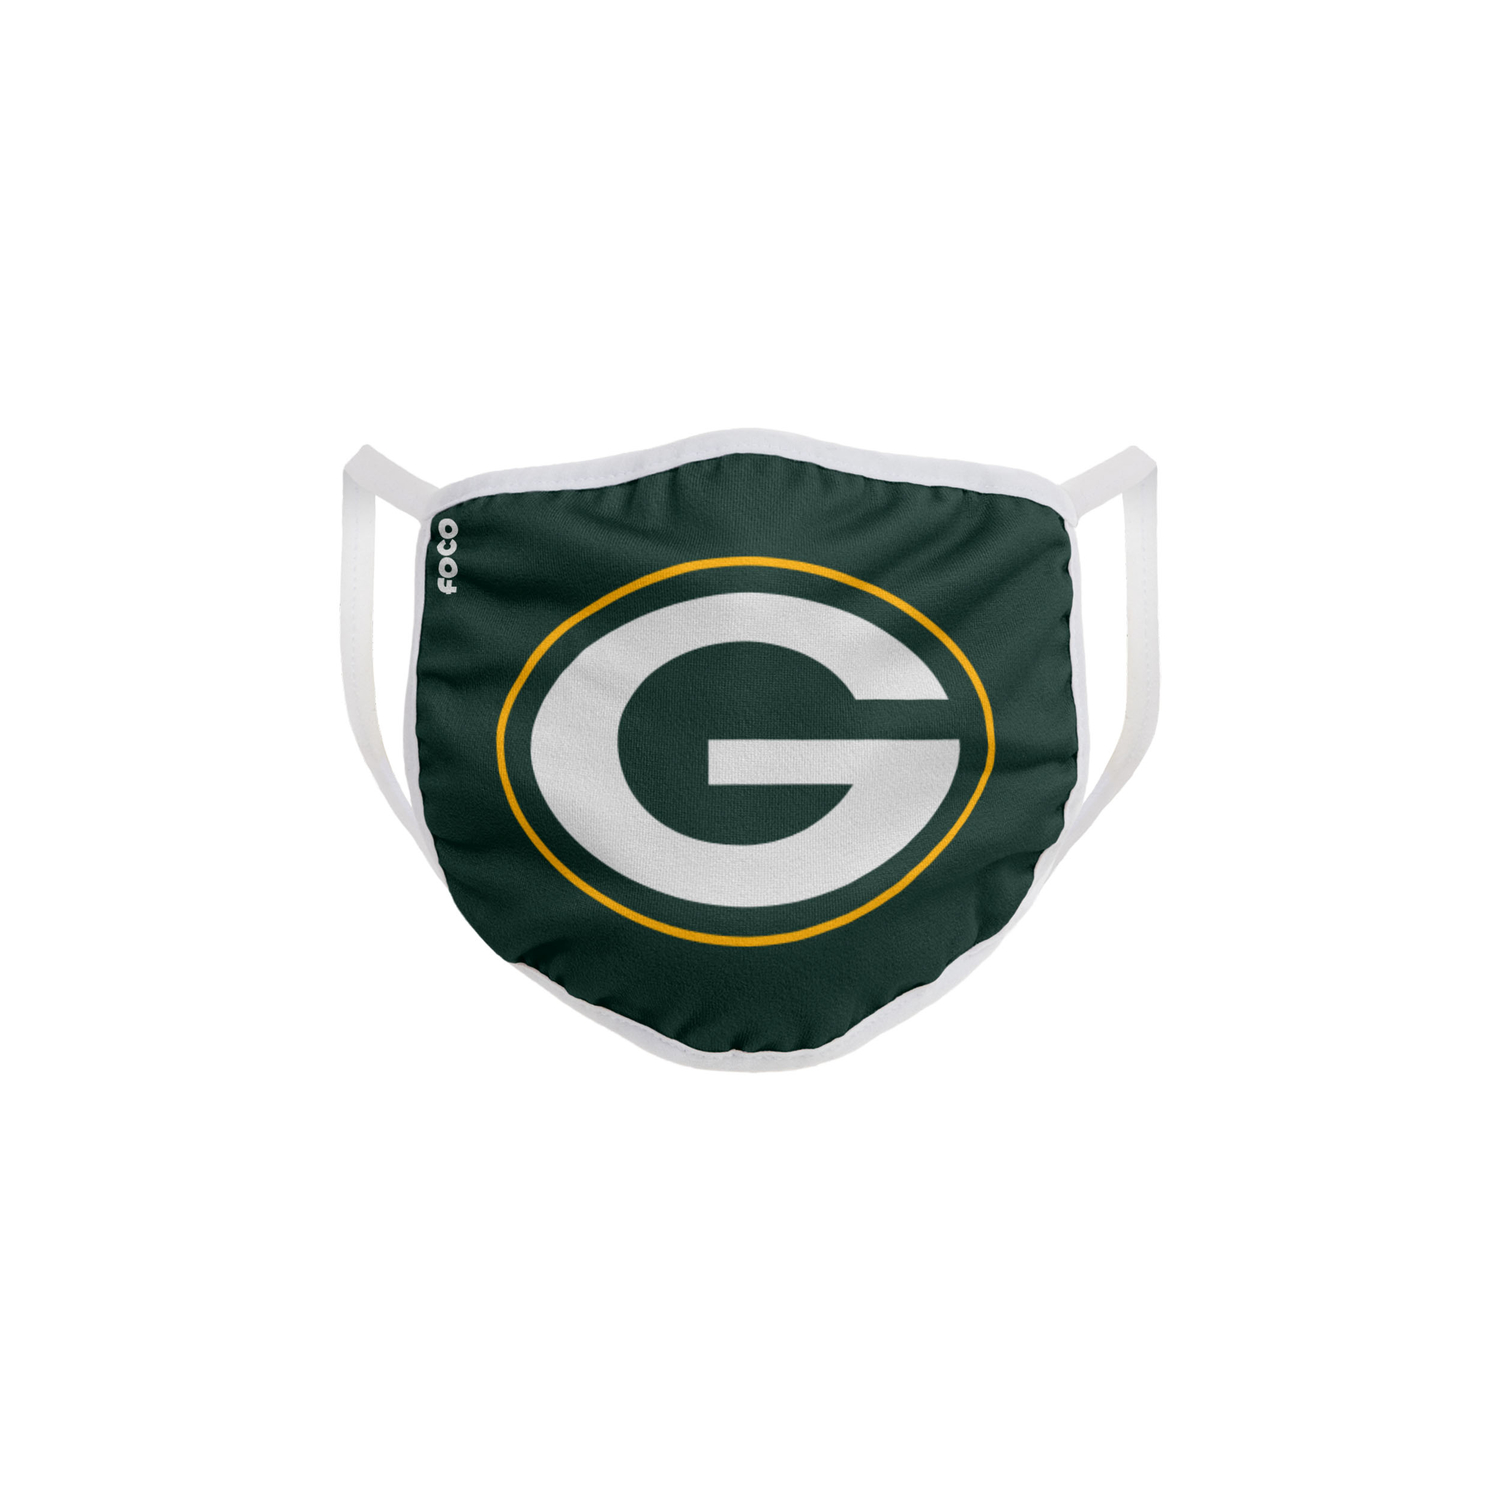 FOCO Household Multi-Purpose Green Bay Packers Face Mask Multicolored 1 pk -  194751473753